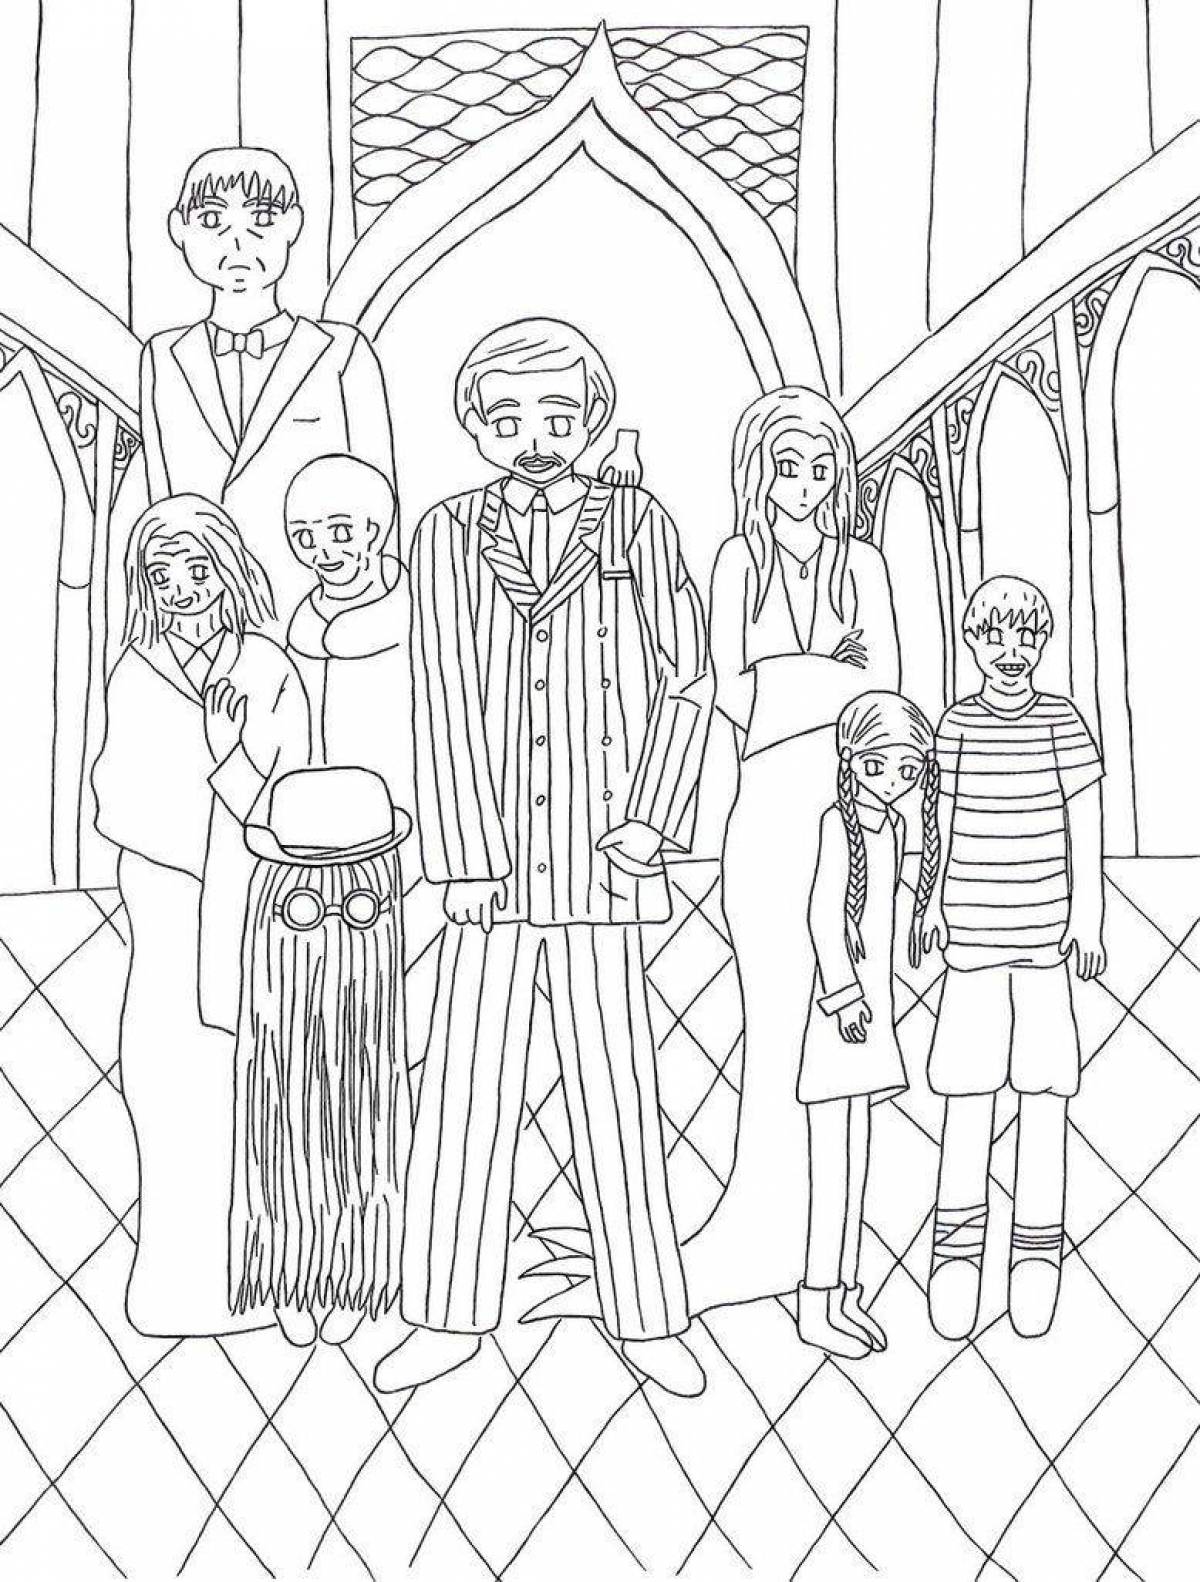 Radiant addams family coloring page